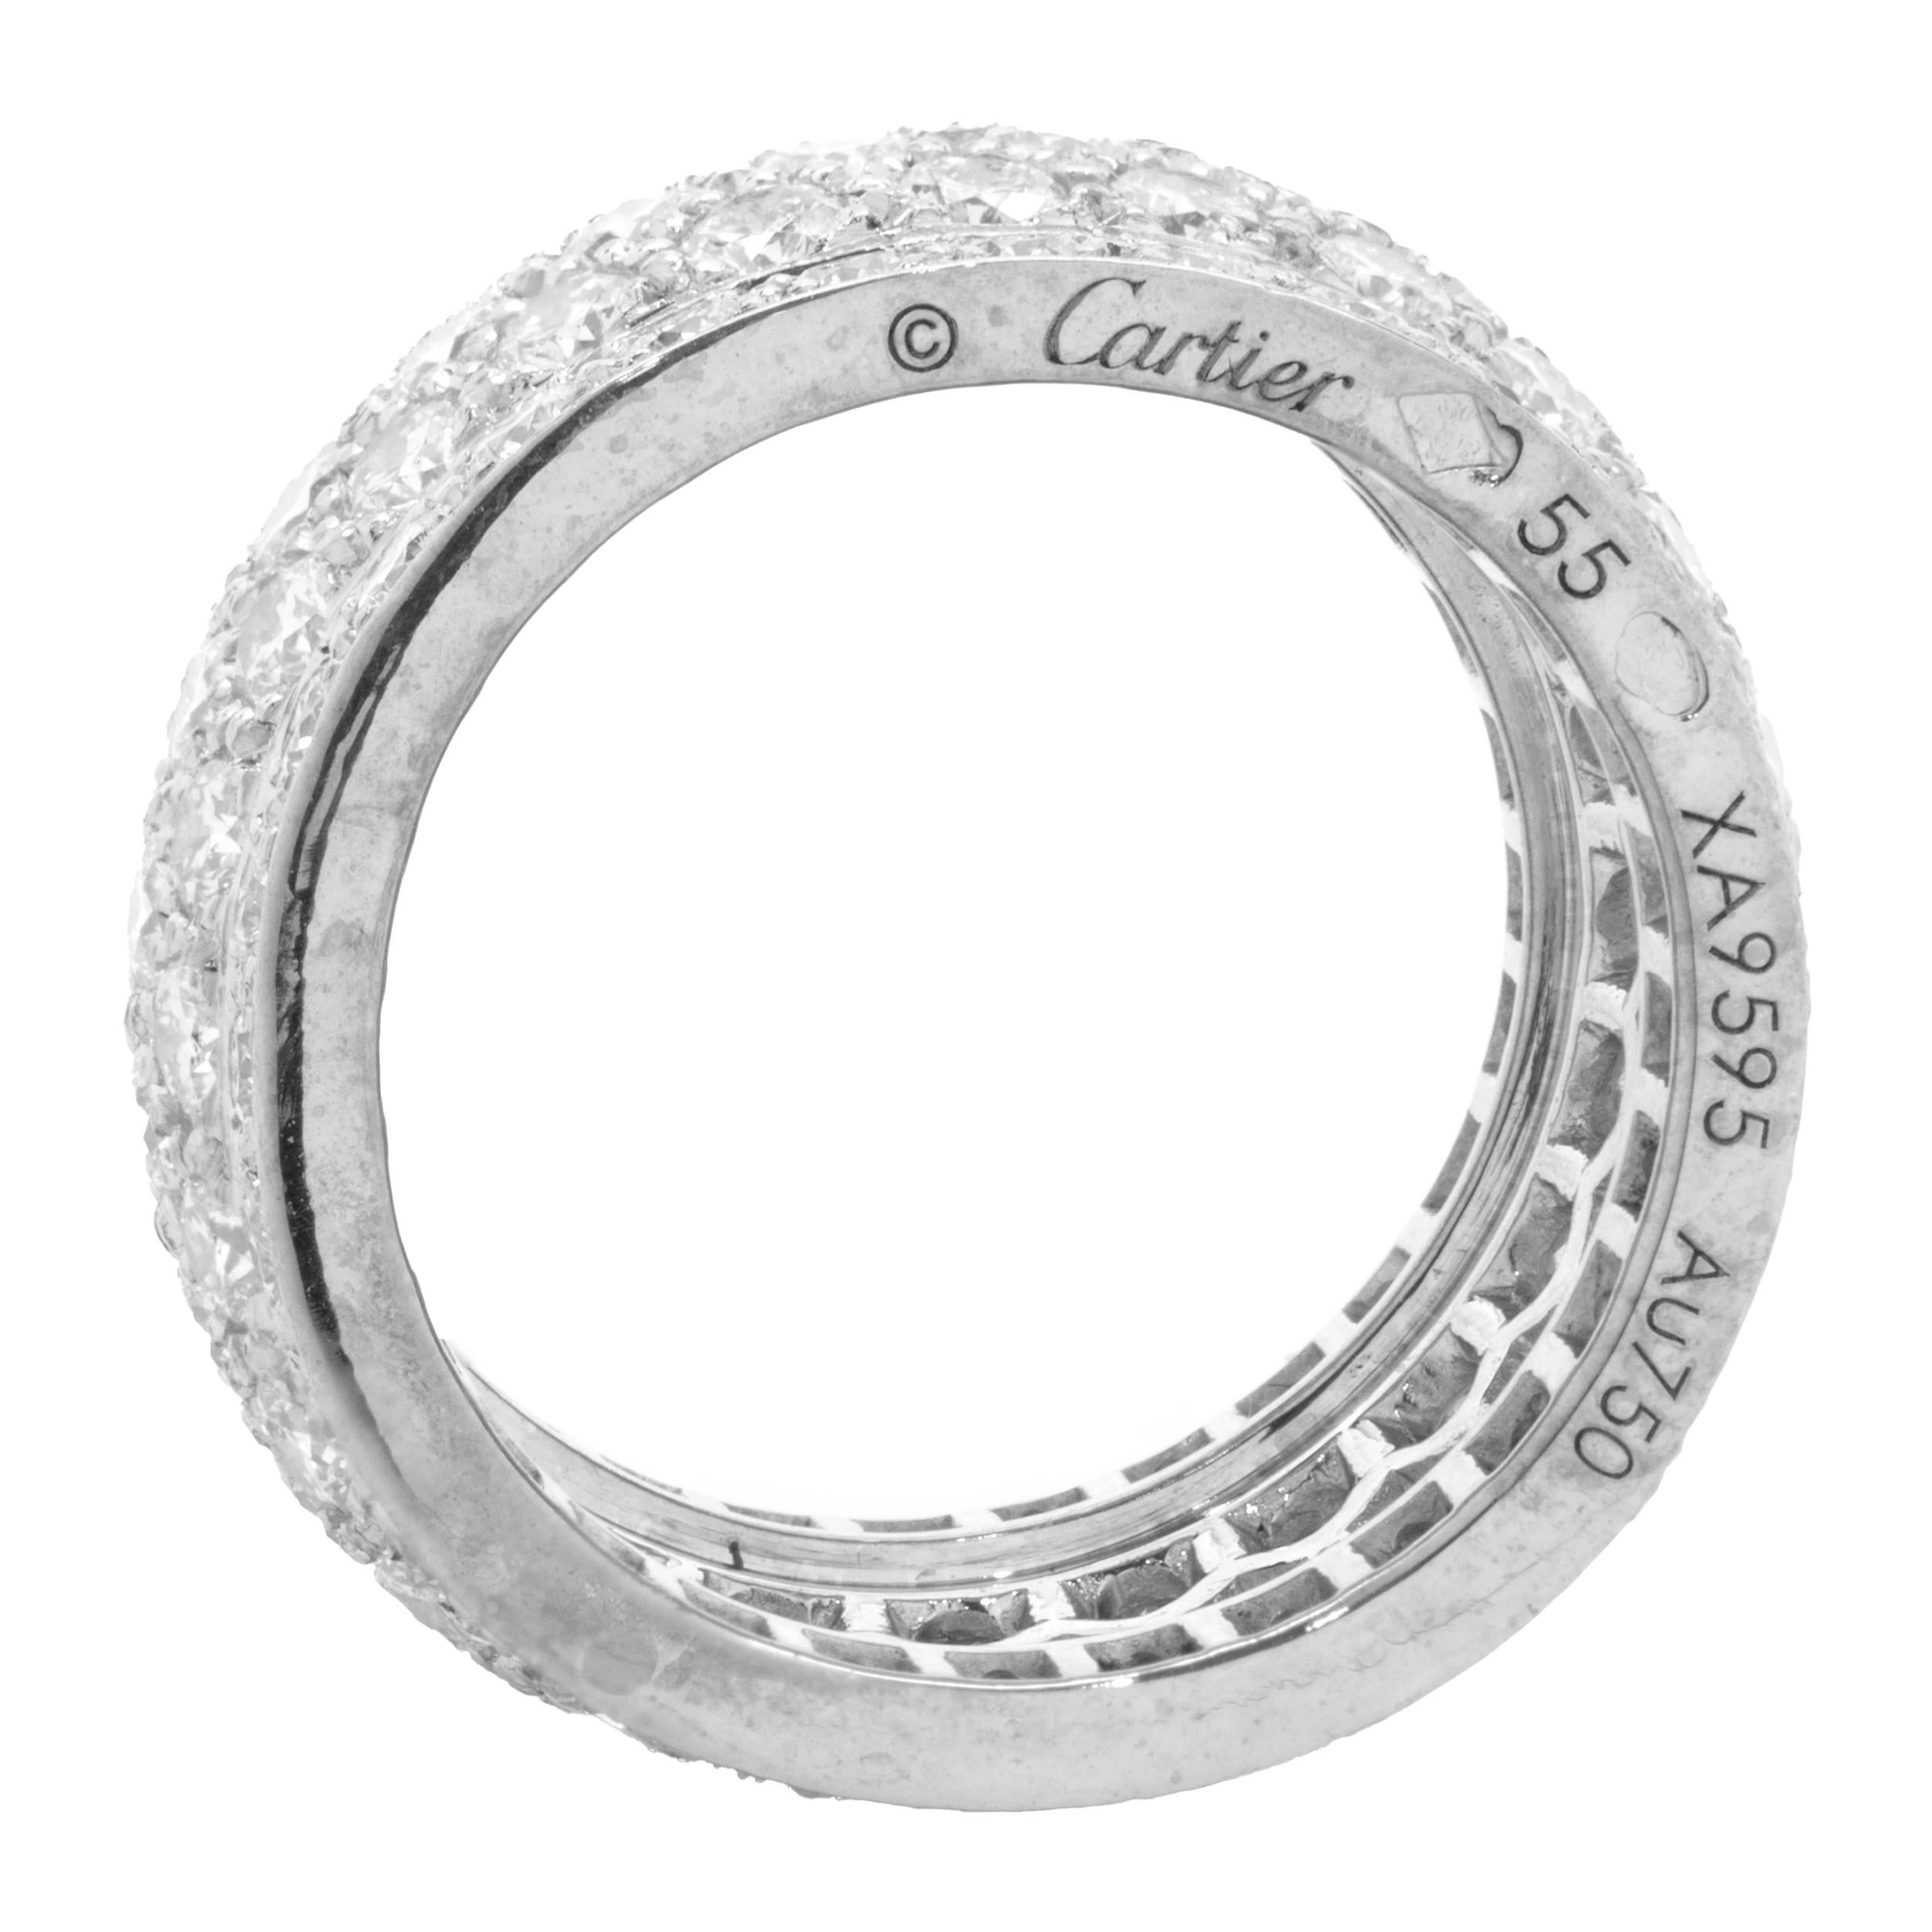 Designer: Cartier
Material: 18K white gold
Diamond: 128 round brilliant cut = 6.50cttw
Color: F
Clarity: VVS1
Serial # XA9XXX
Size: 7.25
Weight: 12.06 grams

No box or papers included
Guaranteed authentic by seller 